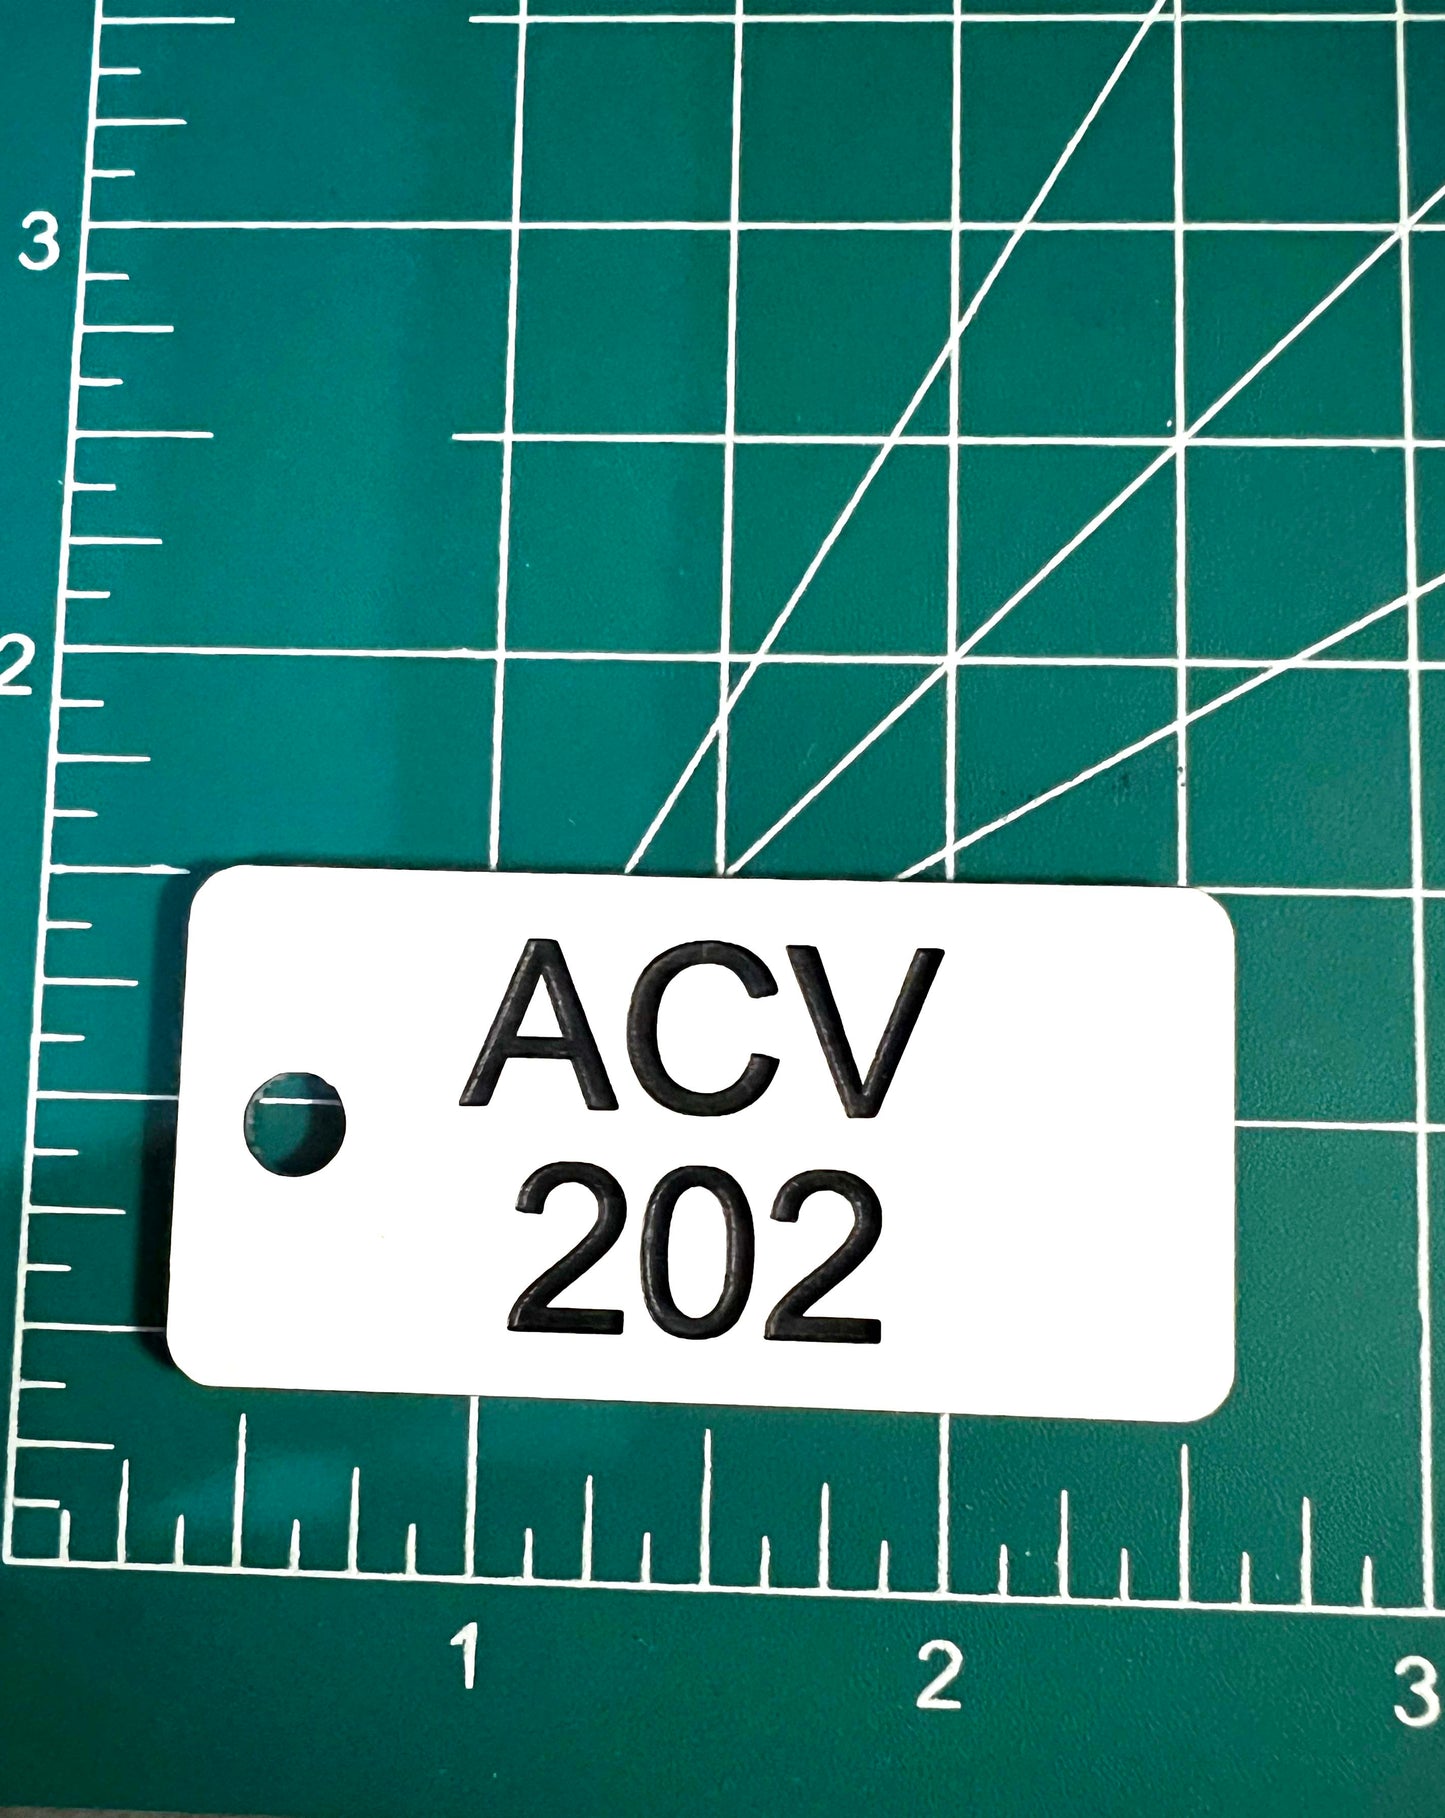 Phenolic Labels For Electrical